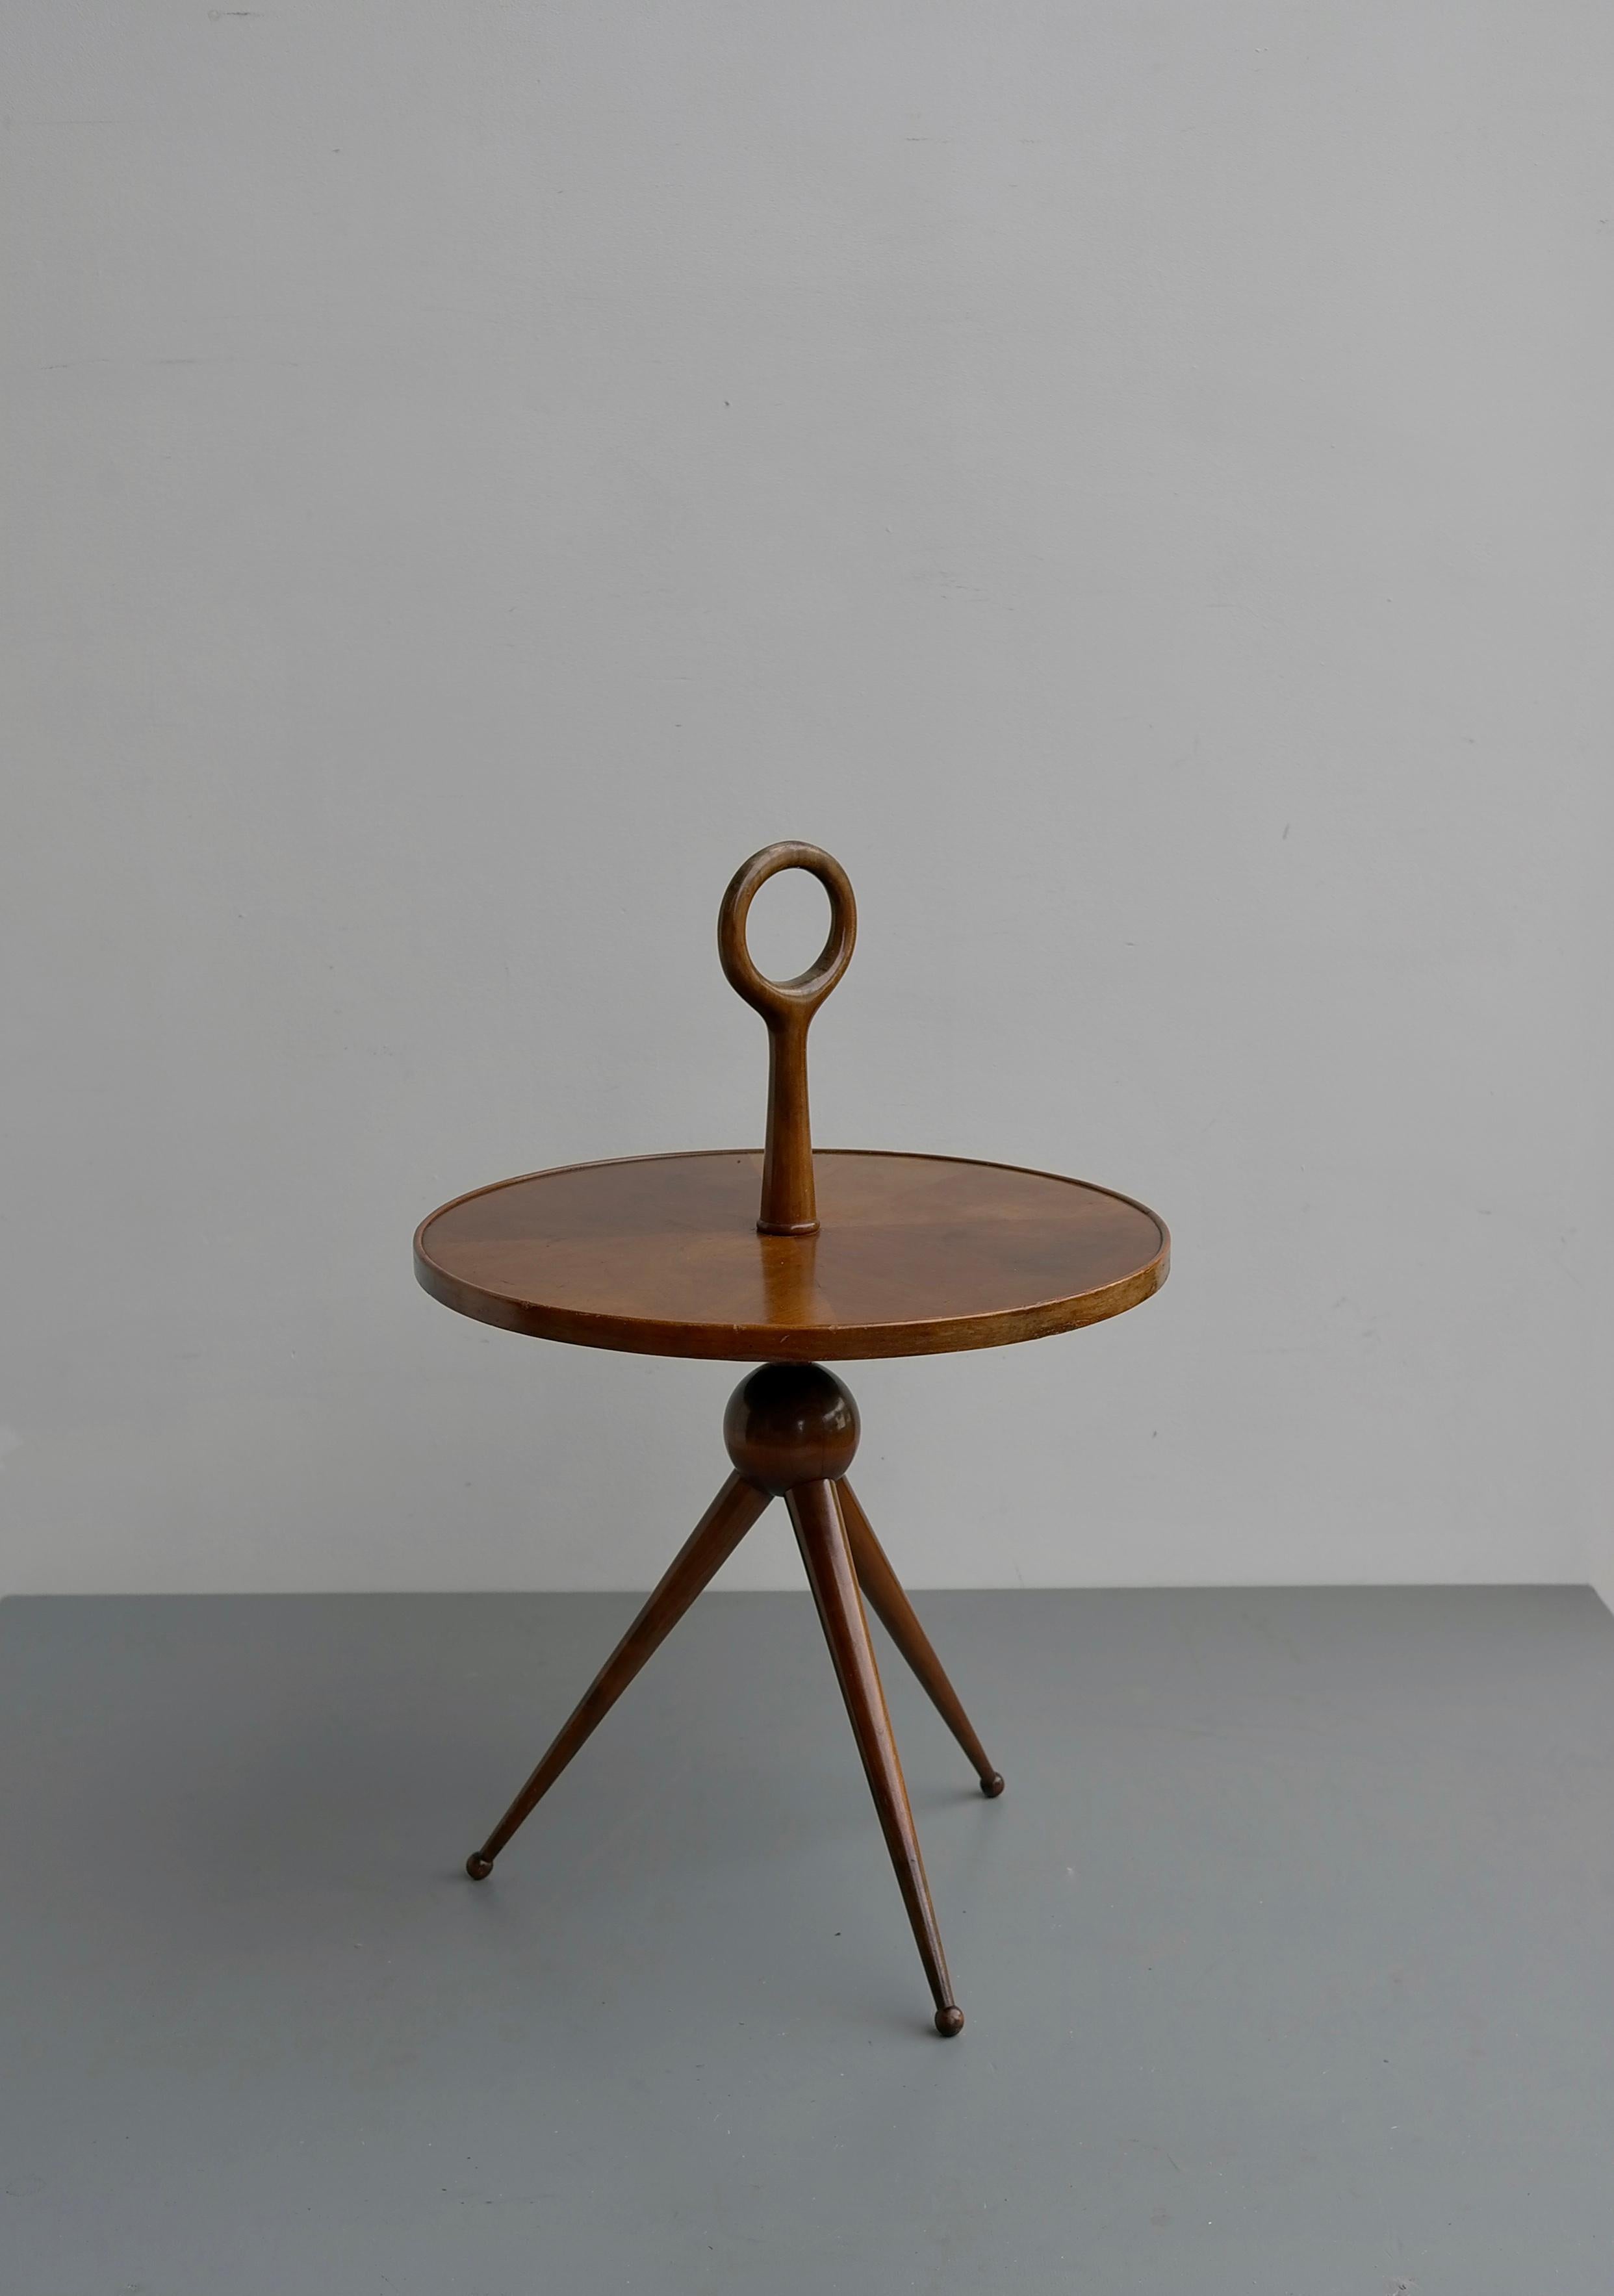 Rare Pietro Chiesa sculptural occasional table fully in wood, Italy 1950s.